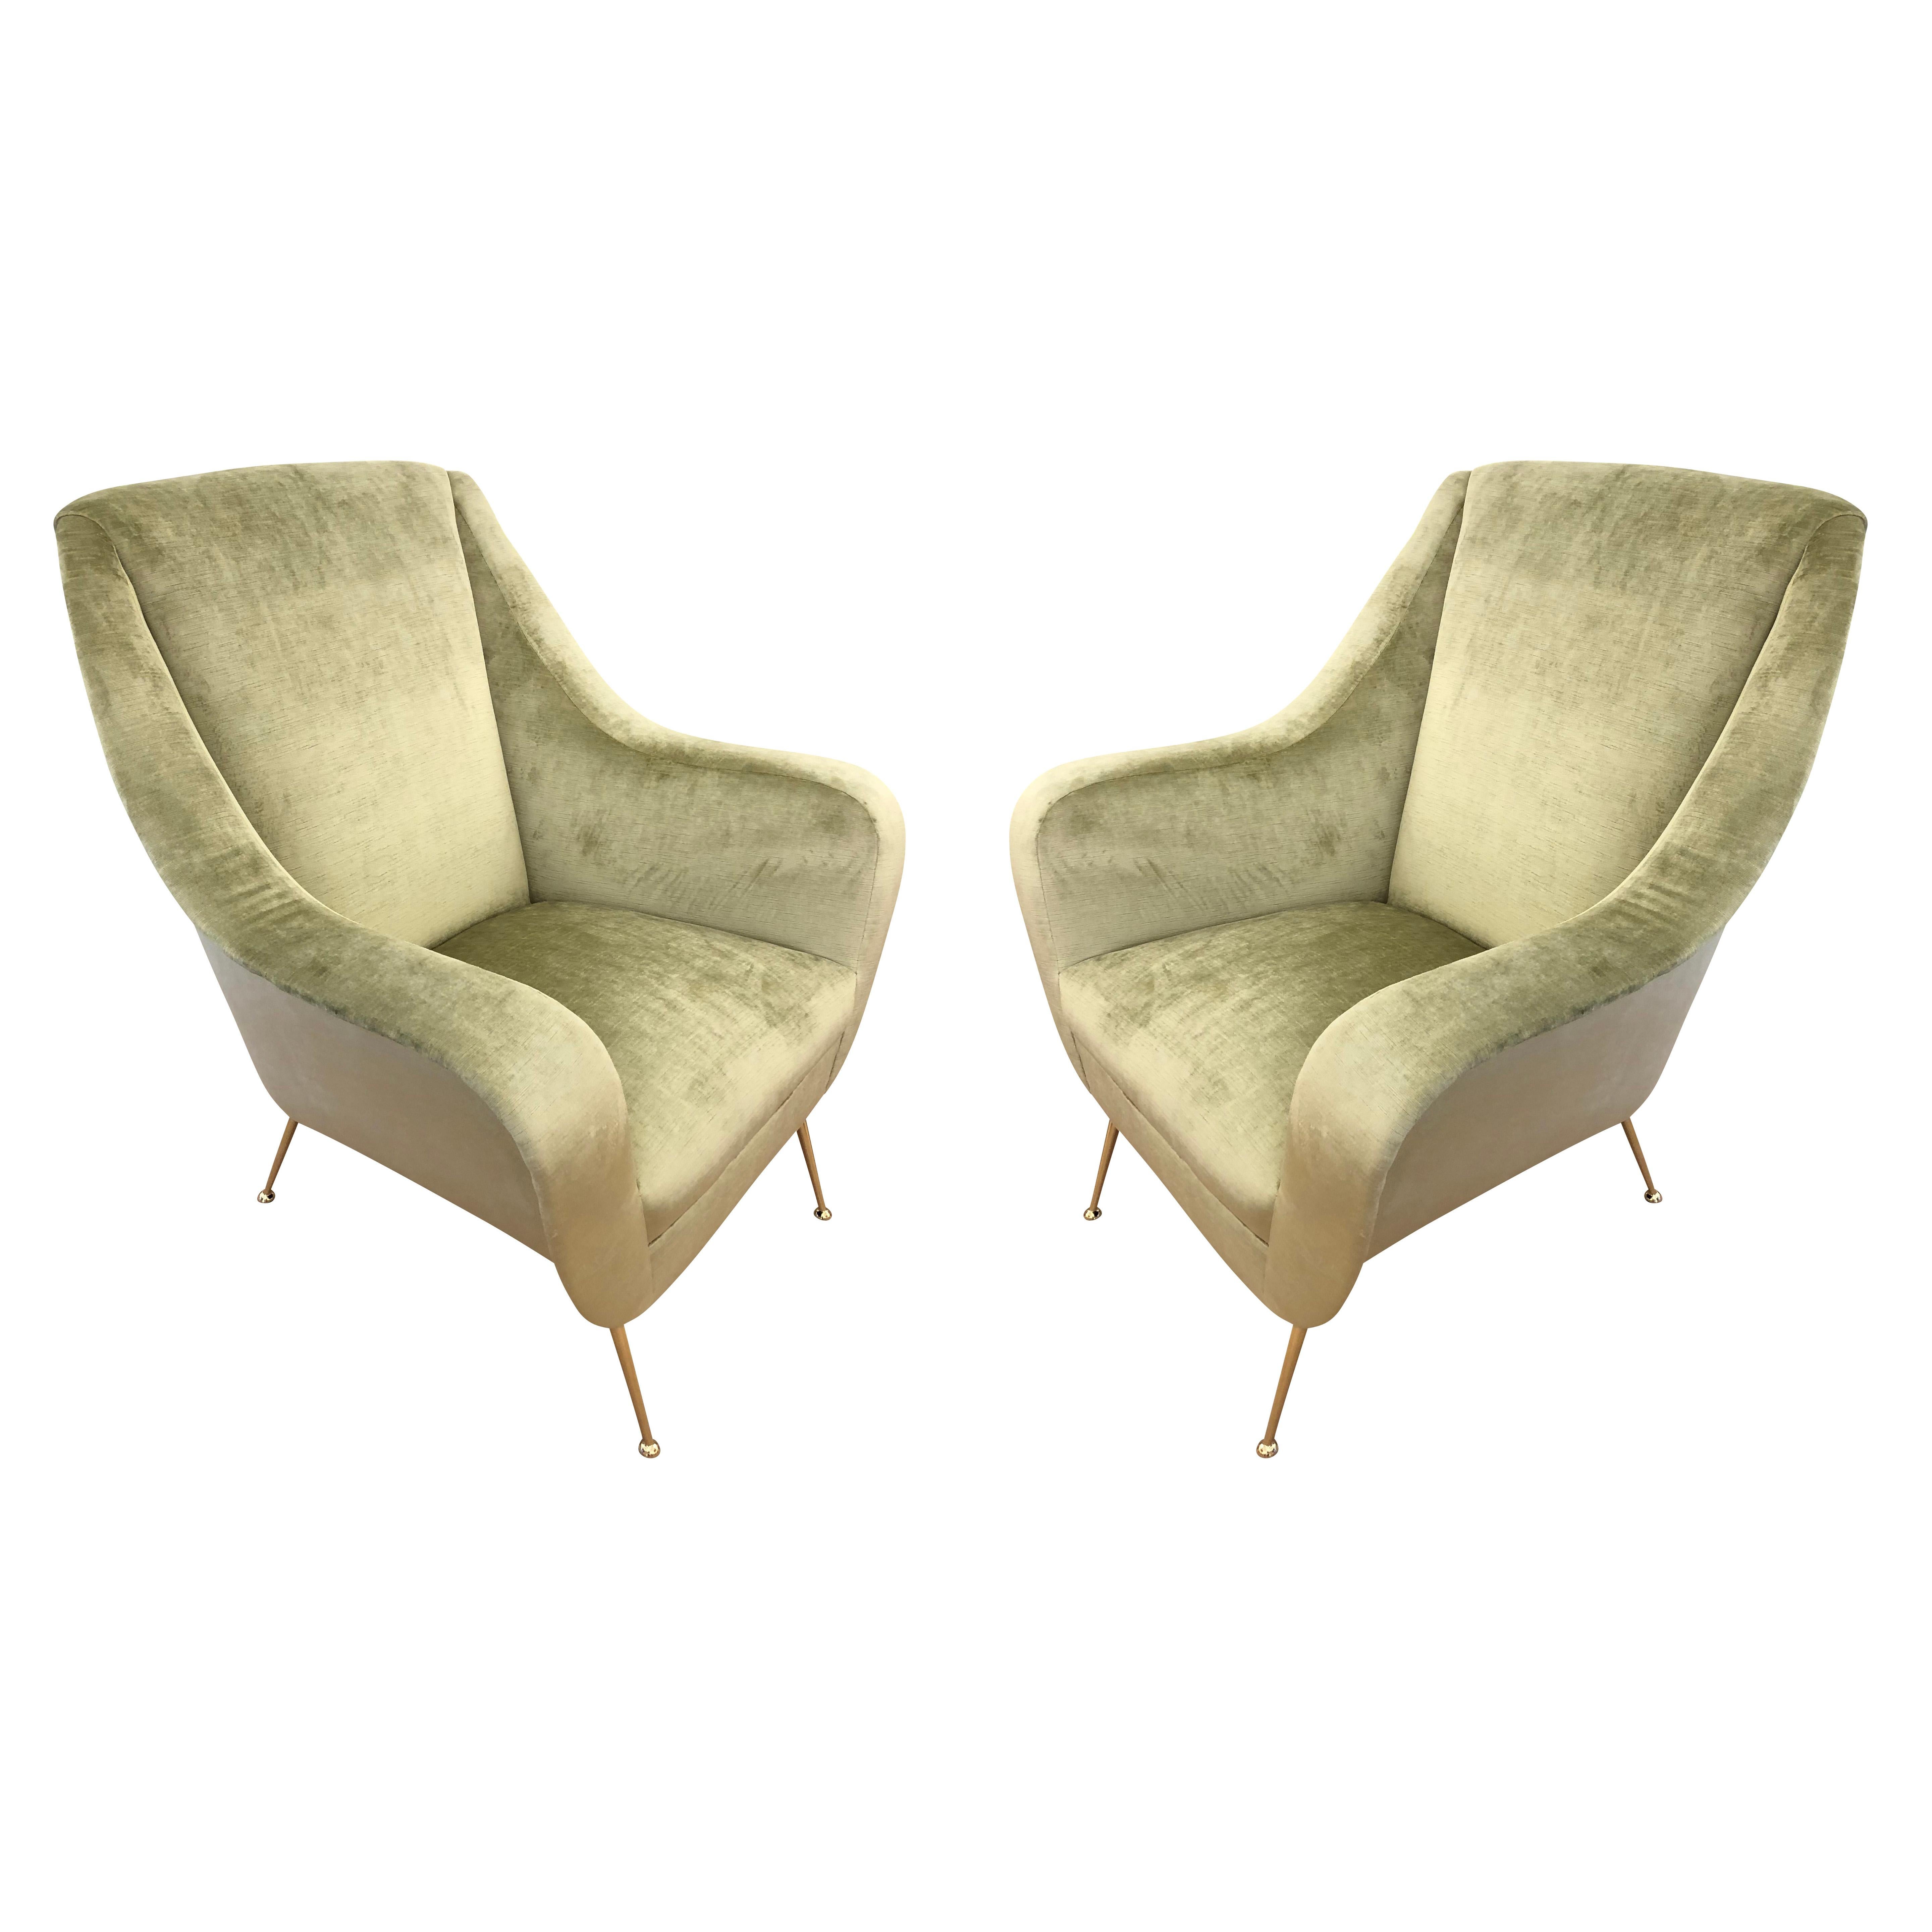 Pair of Light Green Midcentury Lounge Chairs